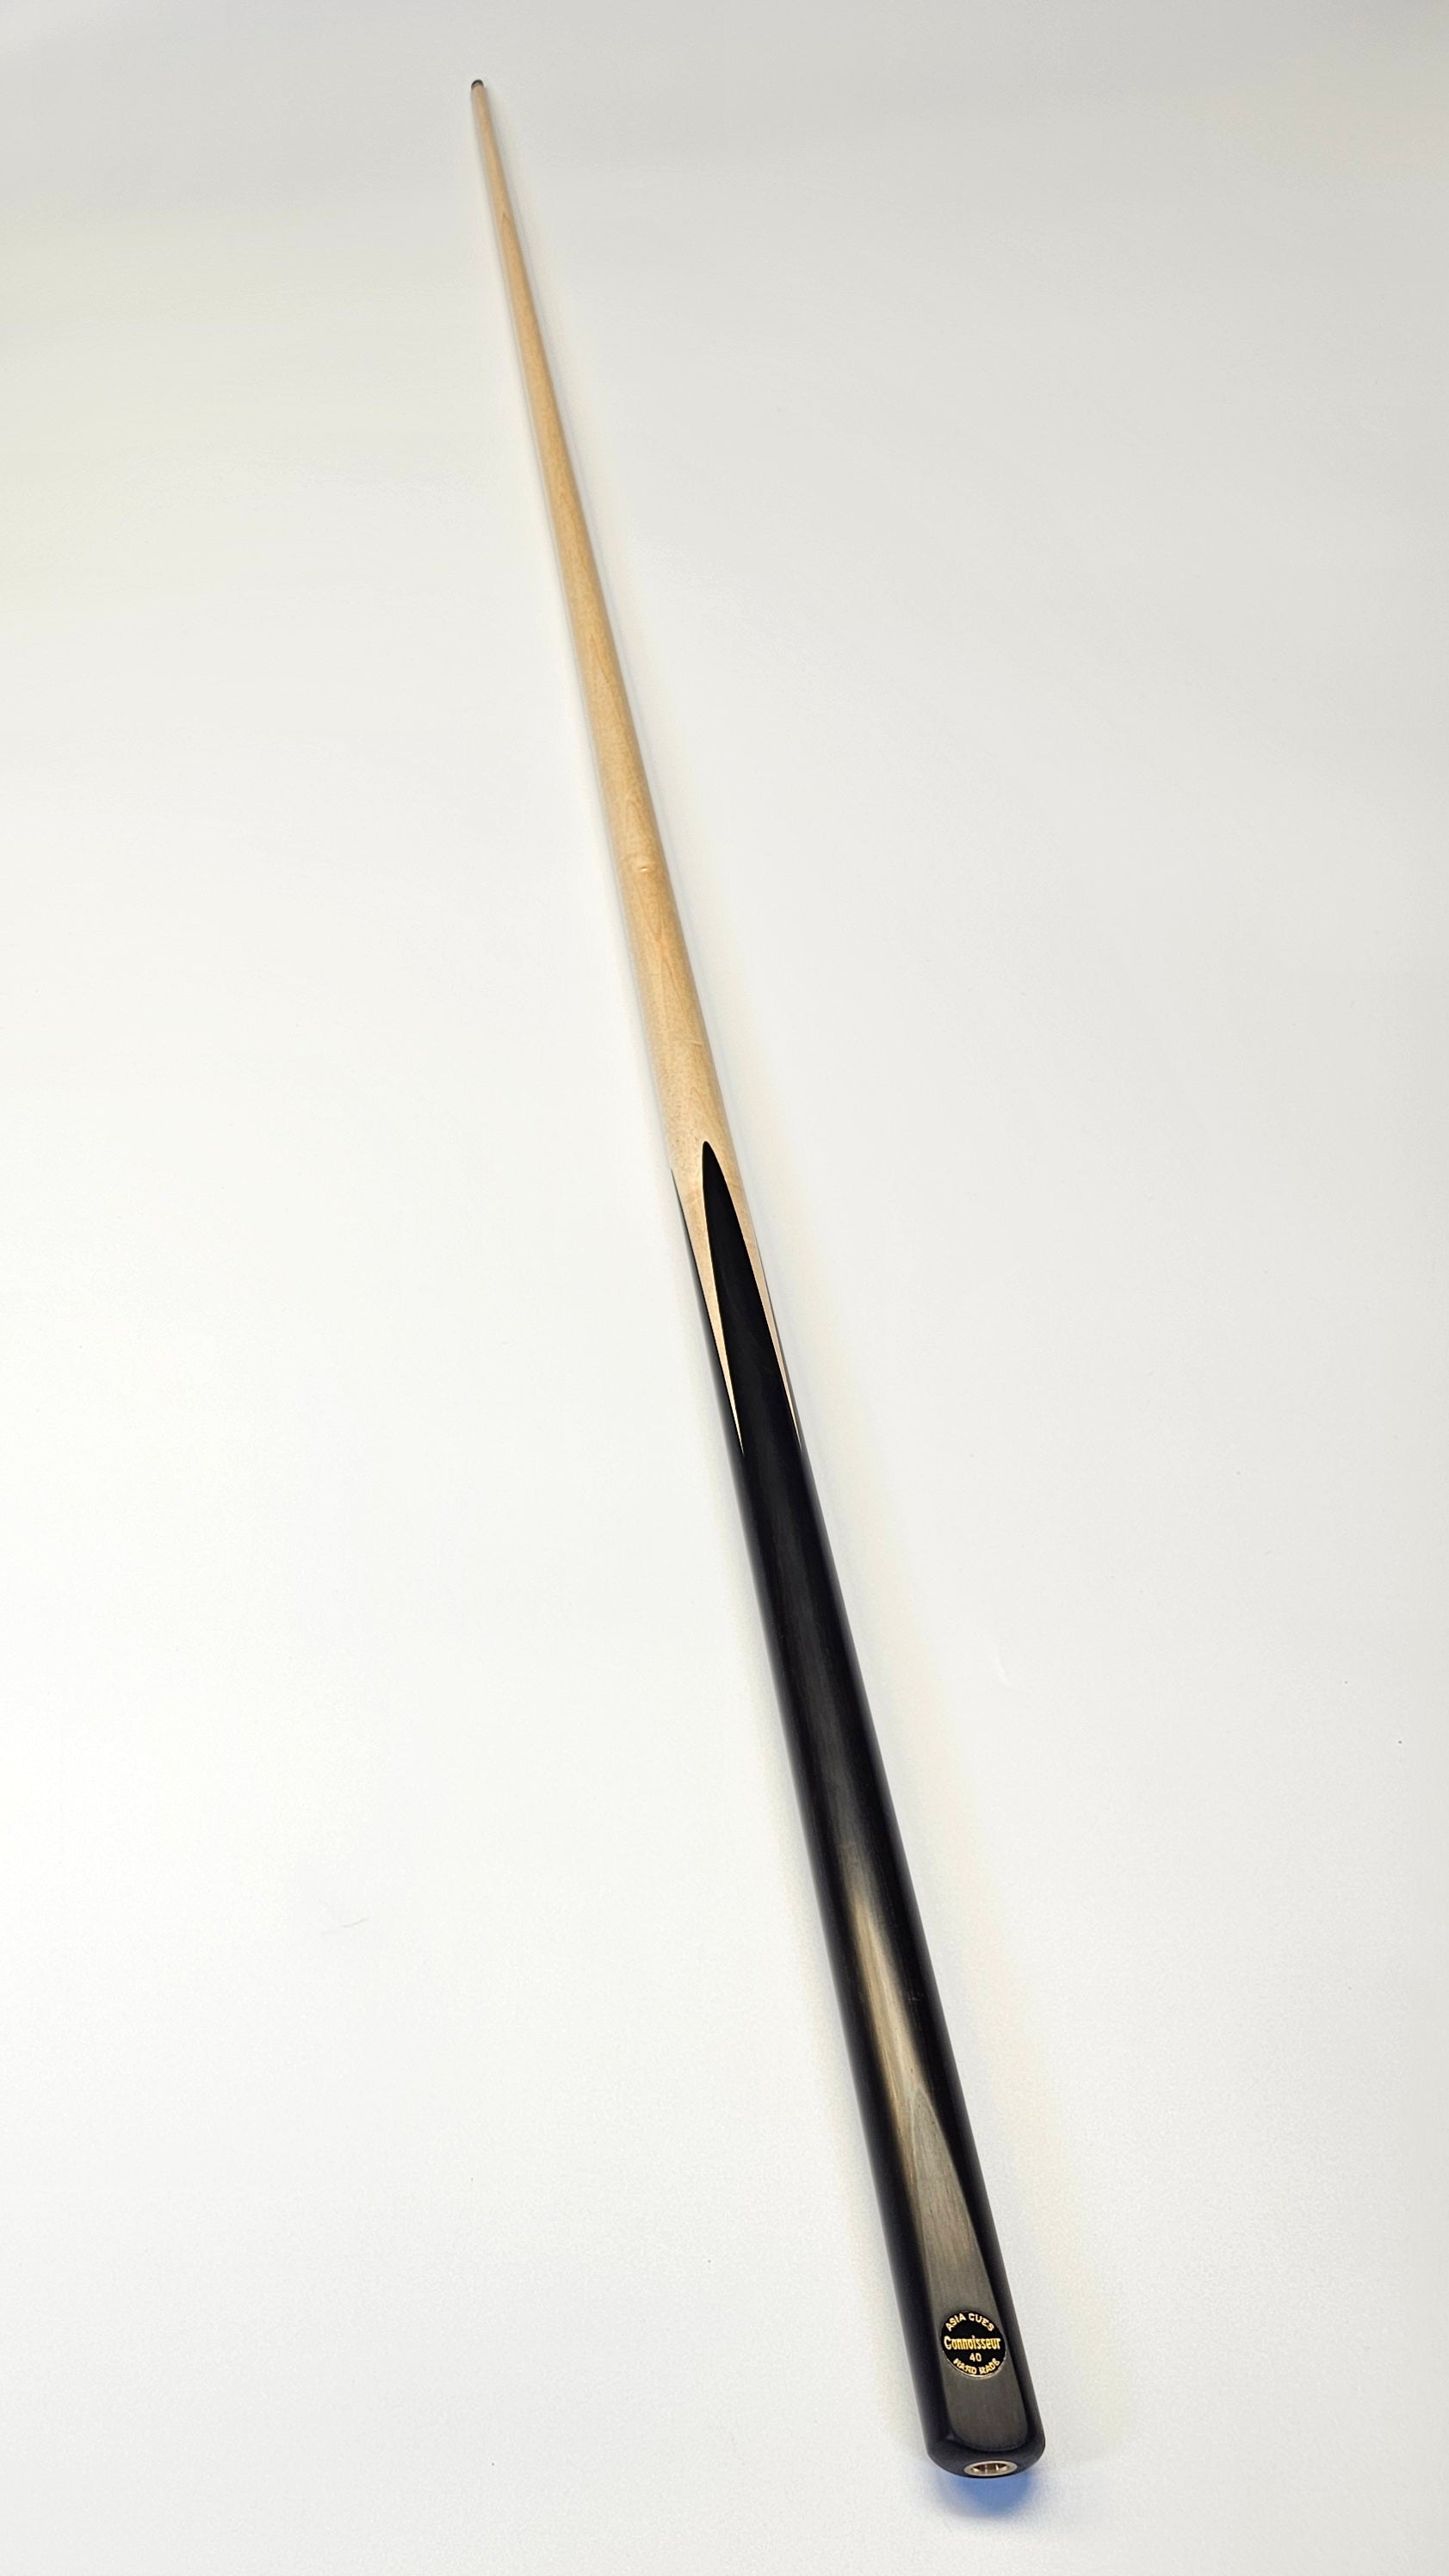 Asia Cues Connoisseur No.40 - One Piece Pool Cue 8.6mm Tip, 17.4oz, 58"